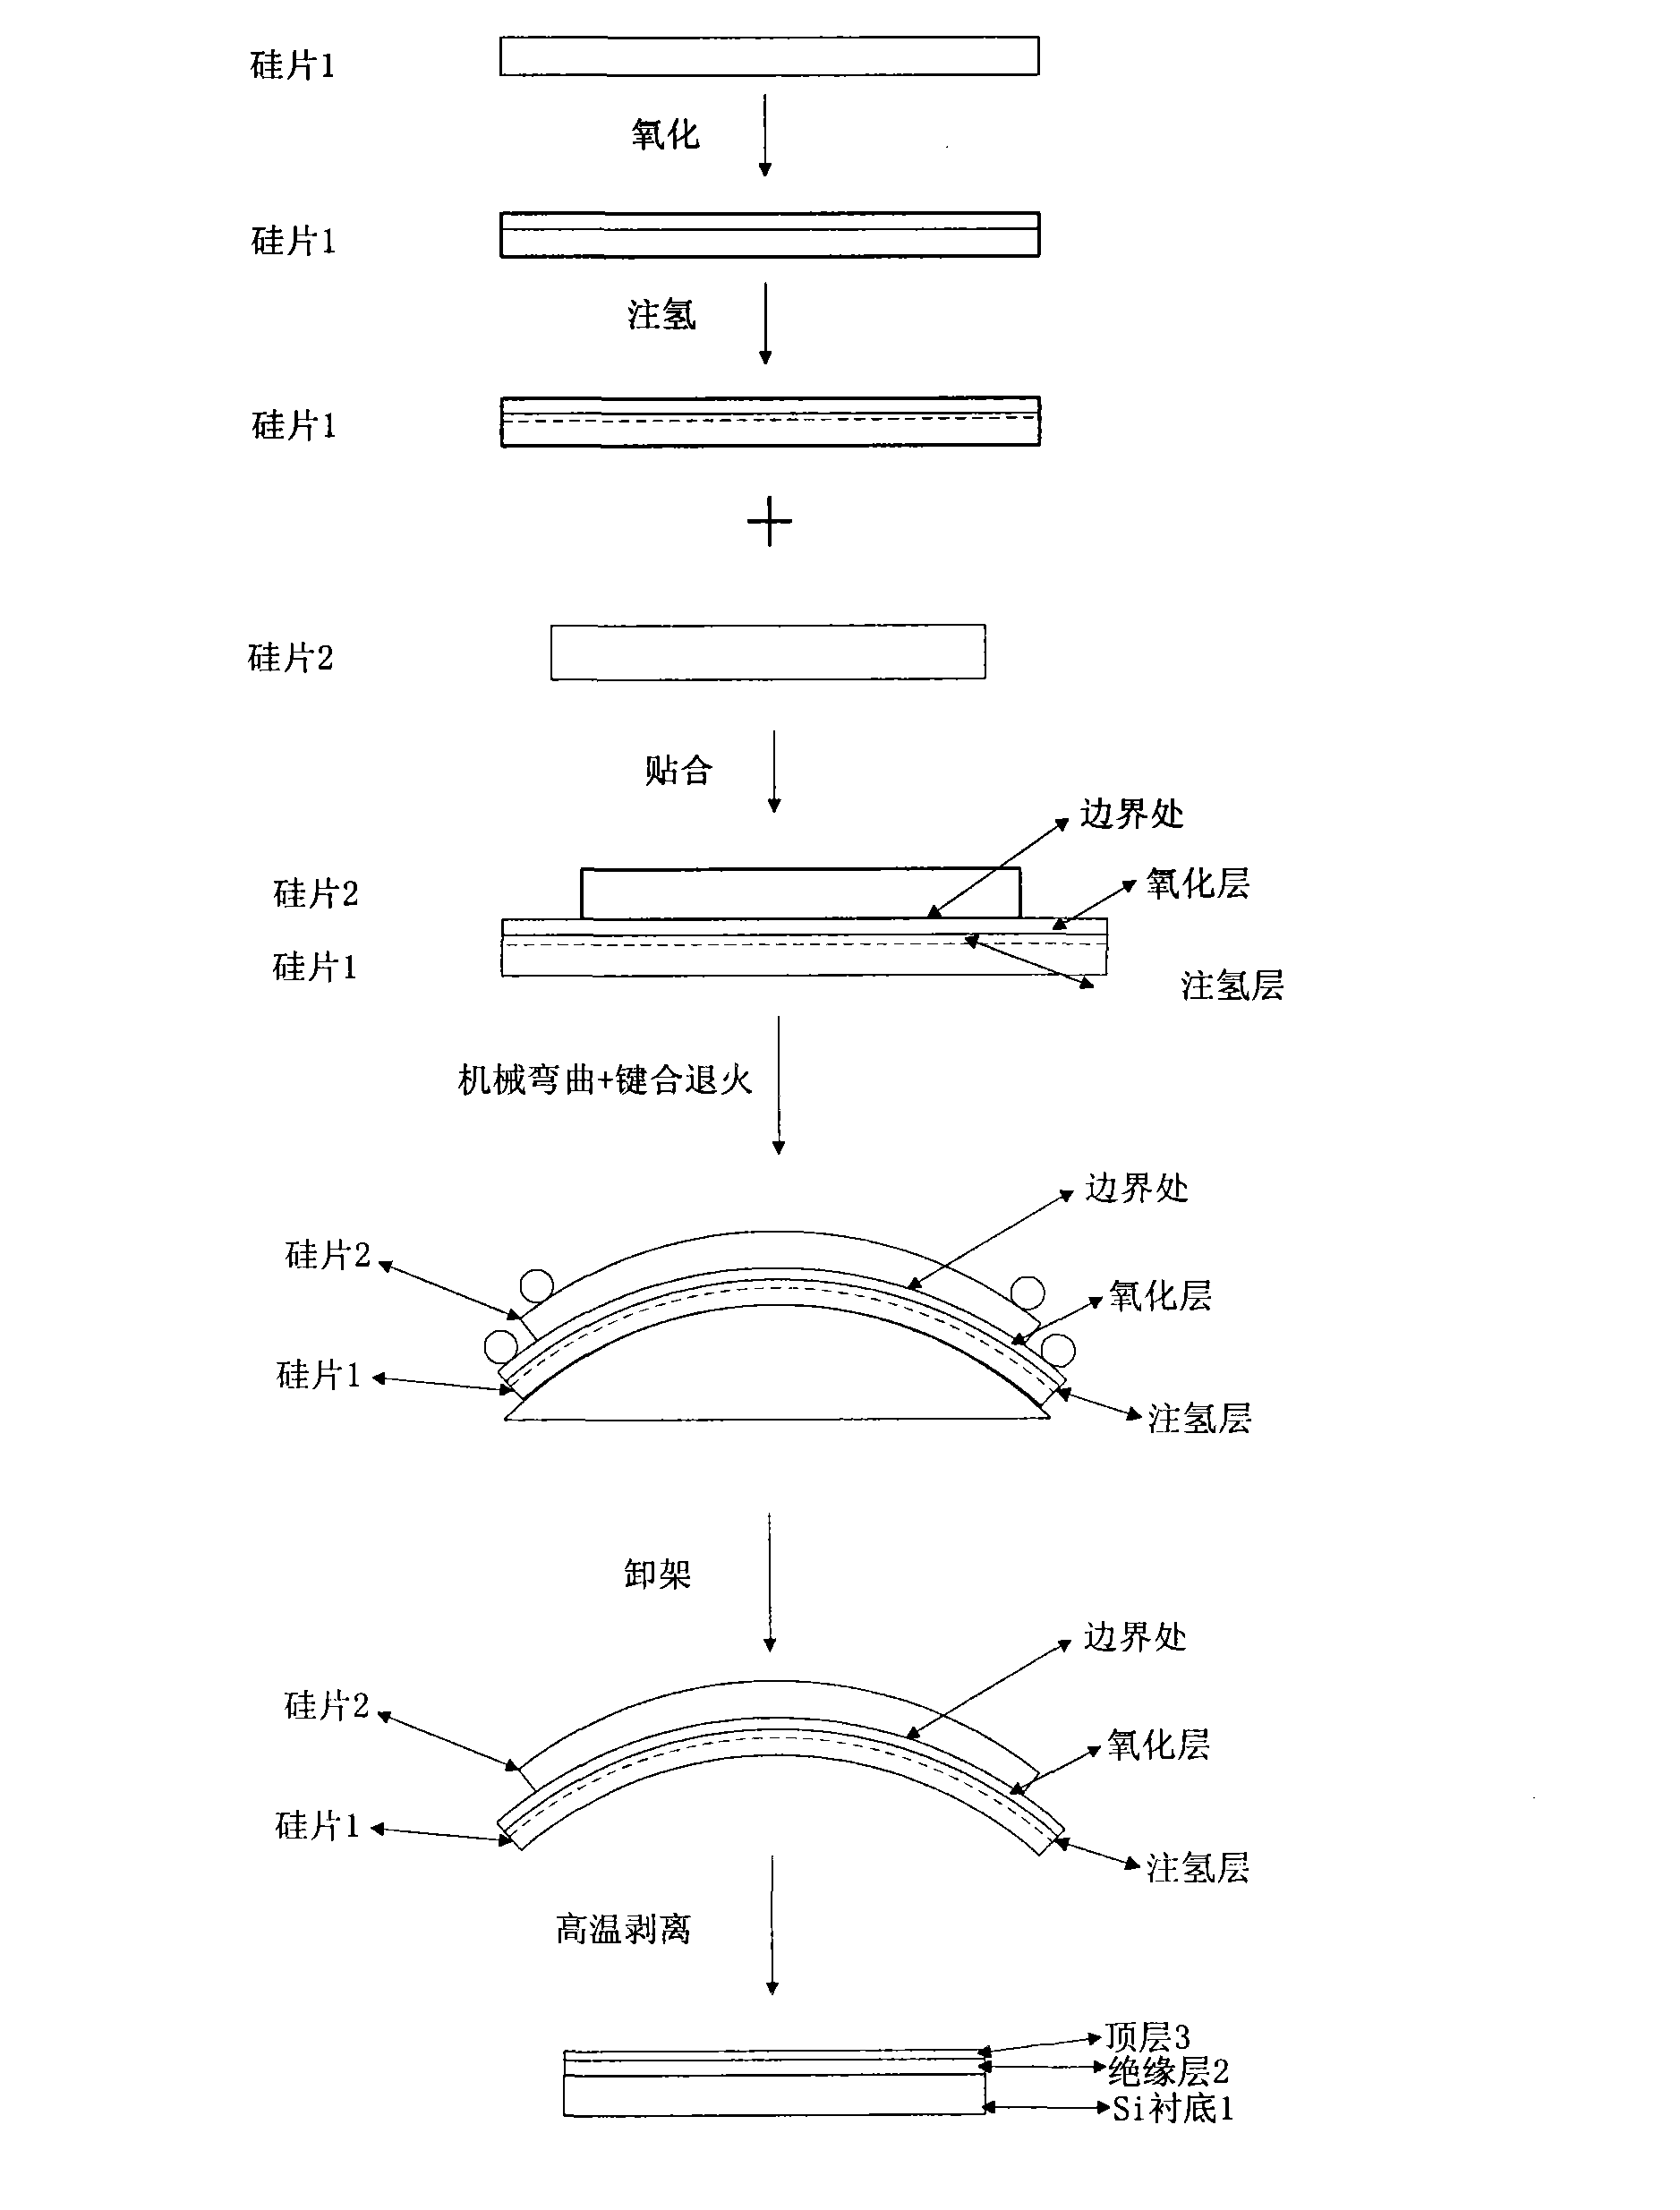 Manufacturing method of mechanical uniaxial strain SOI (silicon-on-insulator) wafer